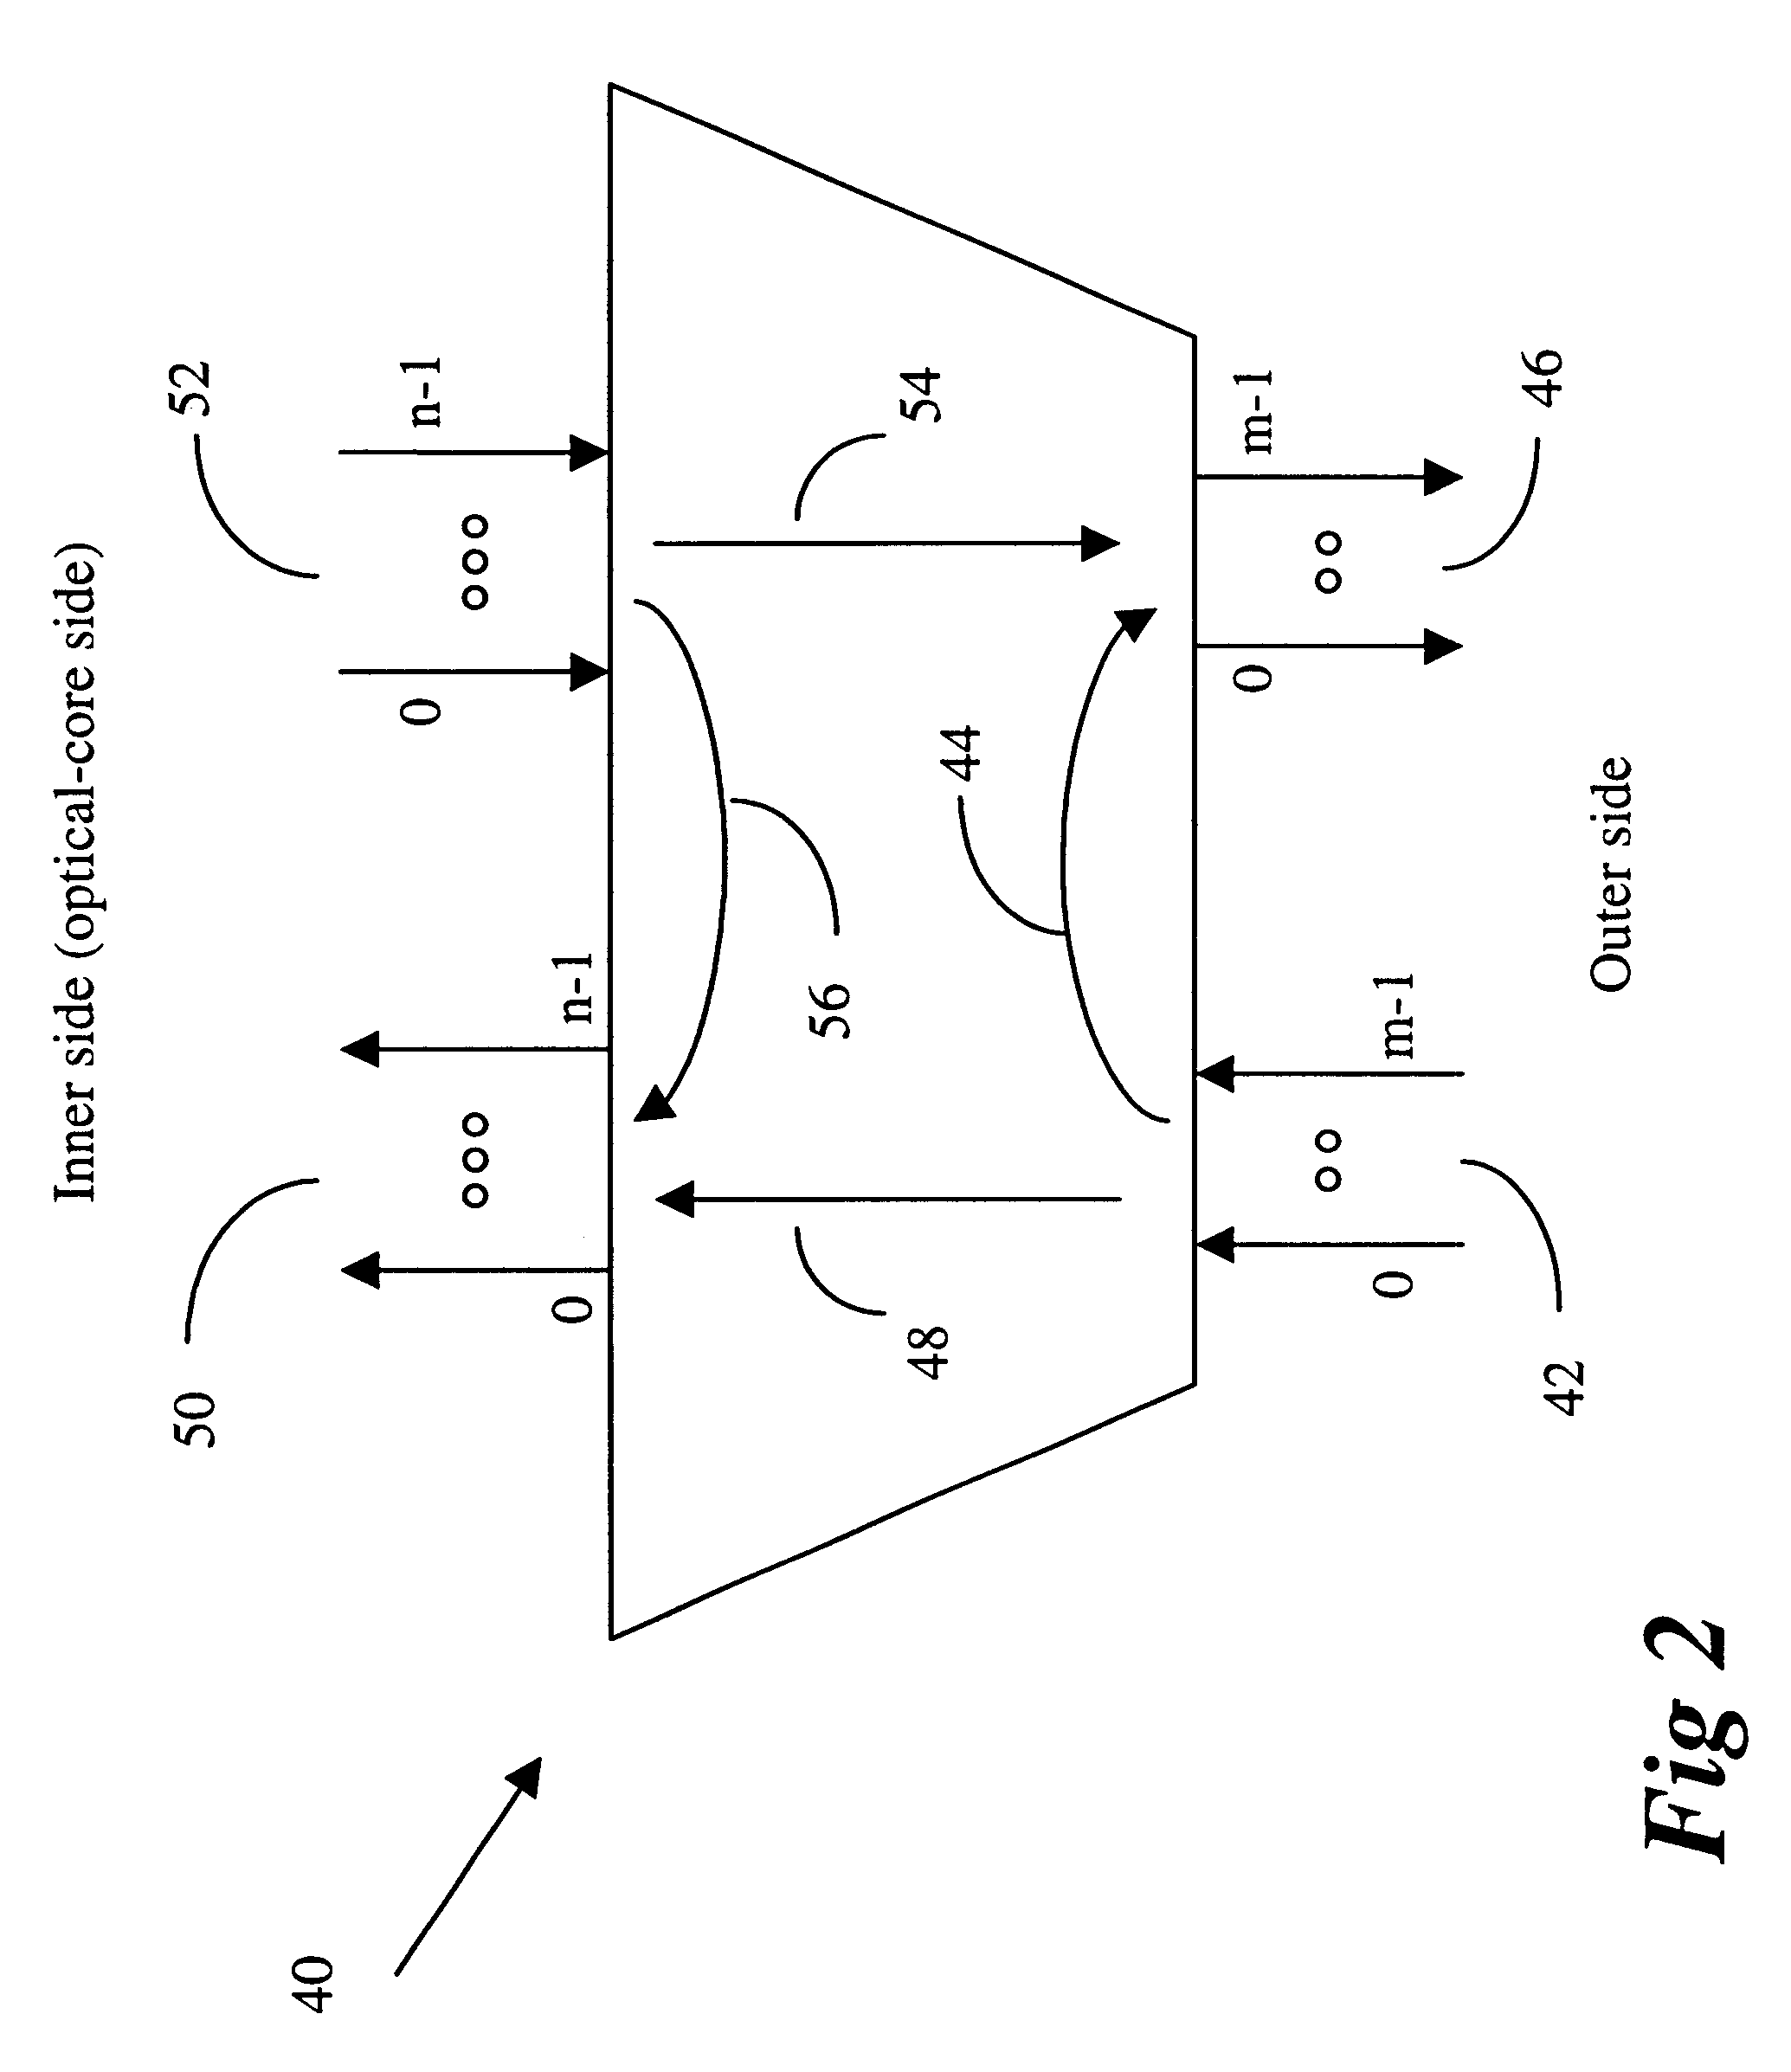 Large scale communications network having a fully meshed optical core transport network